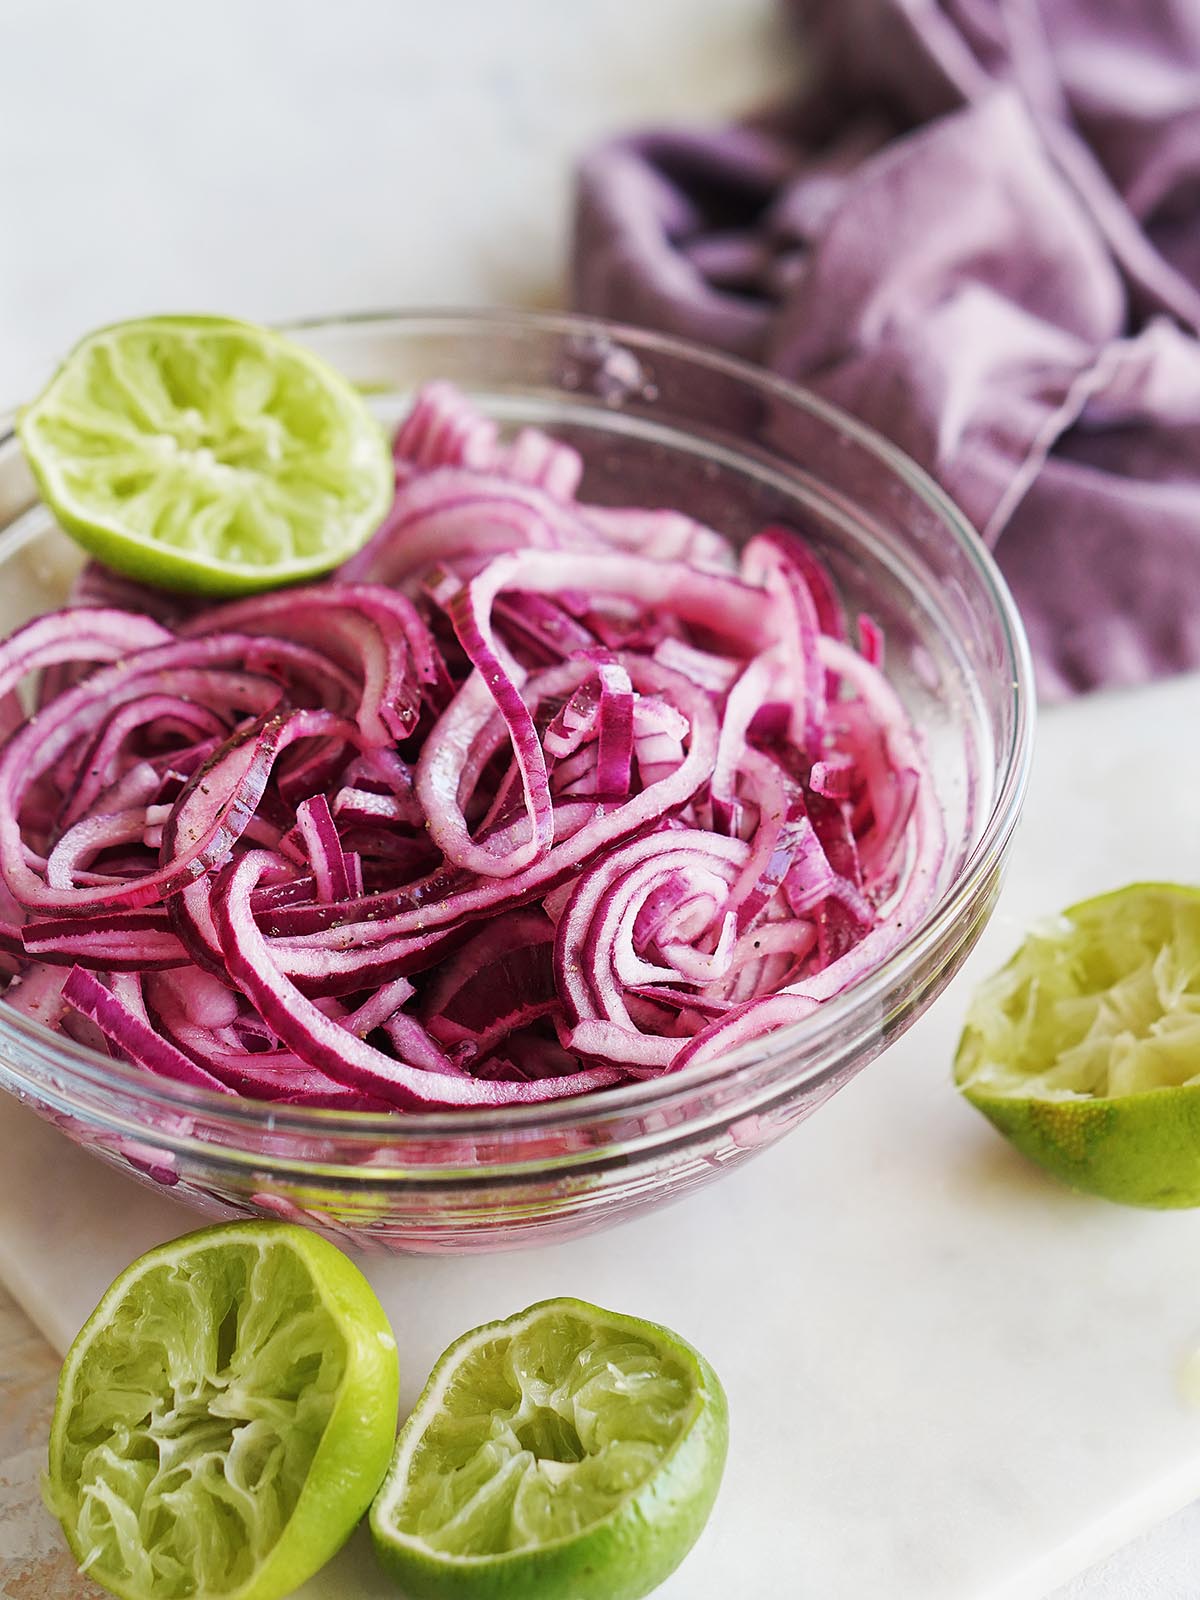 A bowl with sliced red onions and squeezed limes on the side.